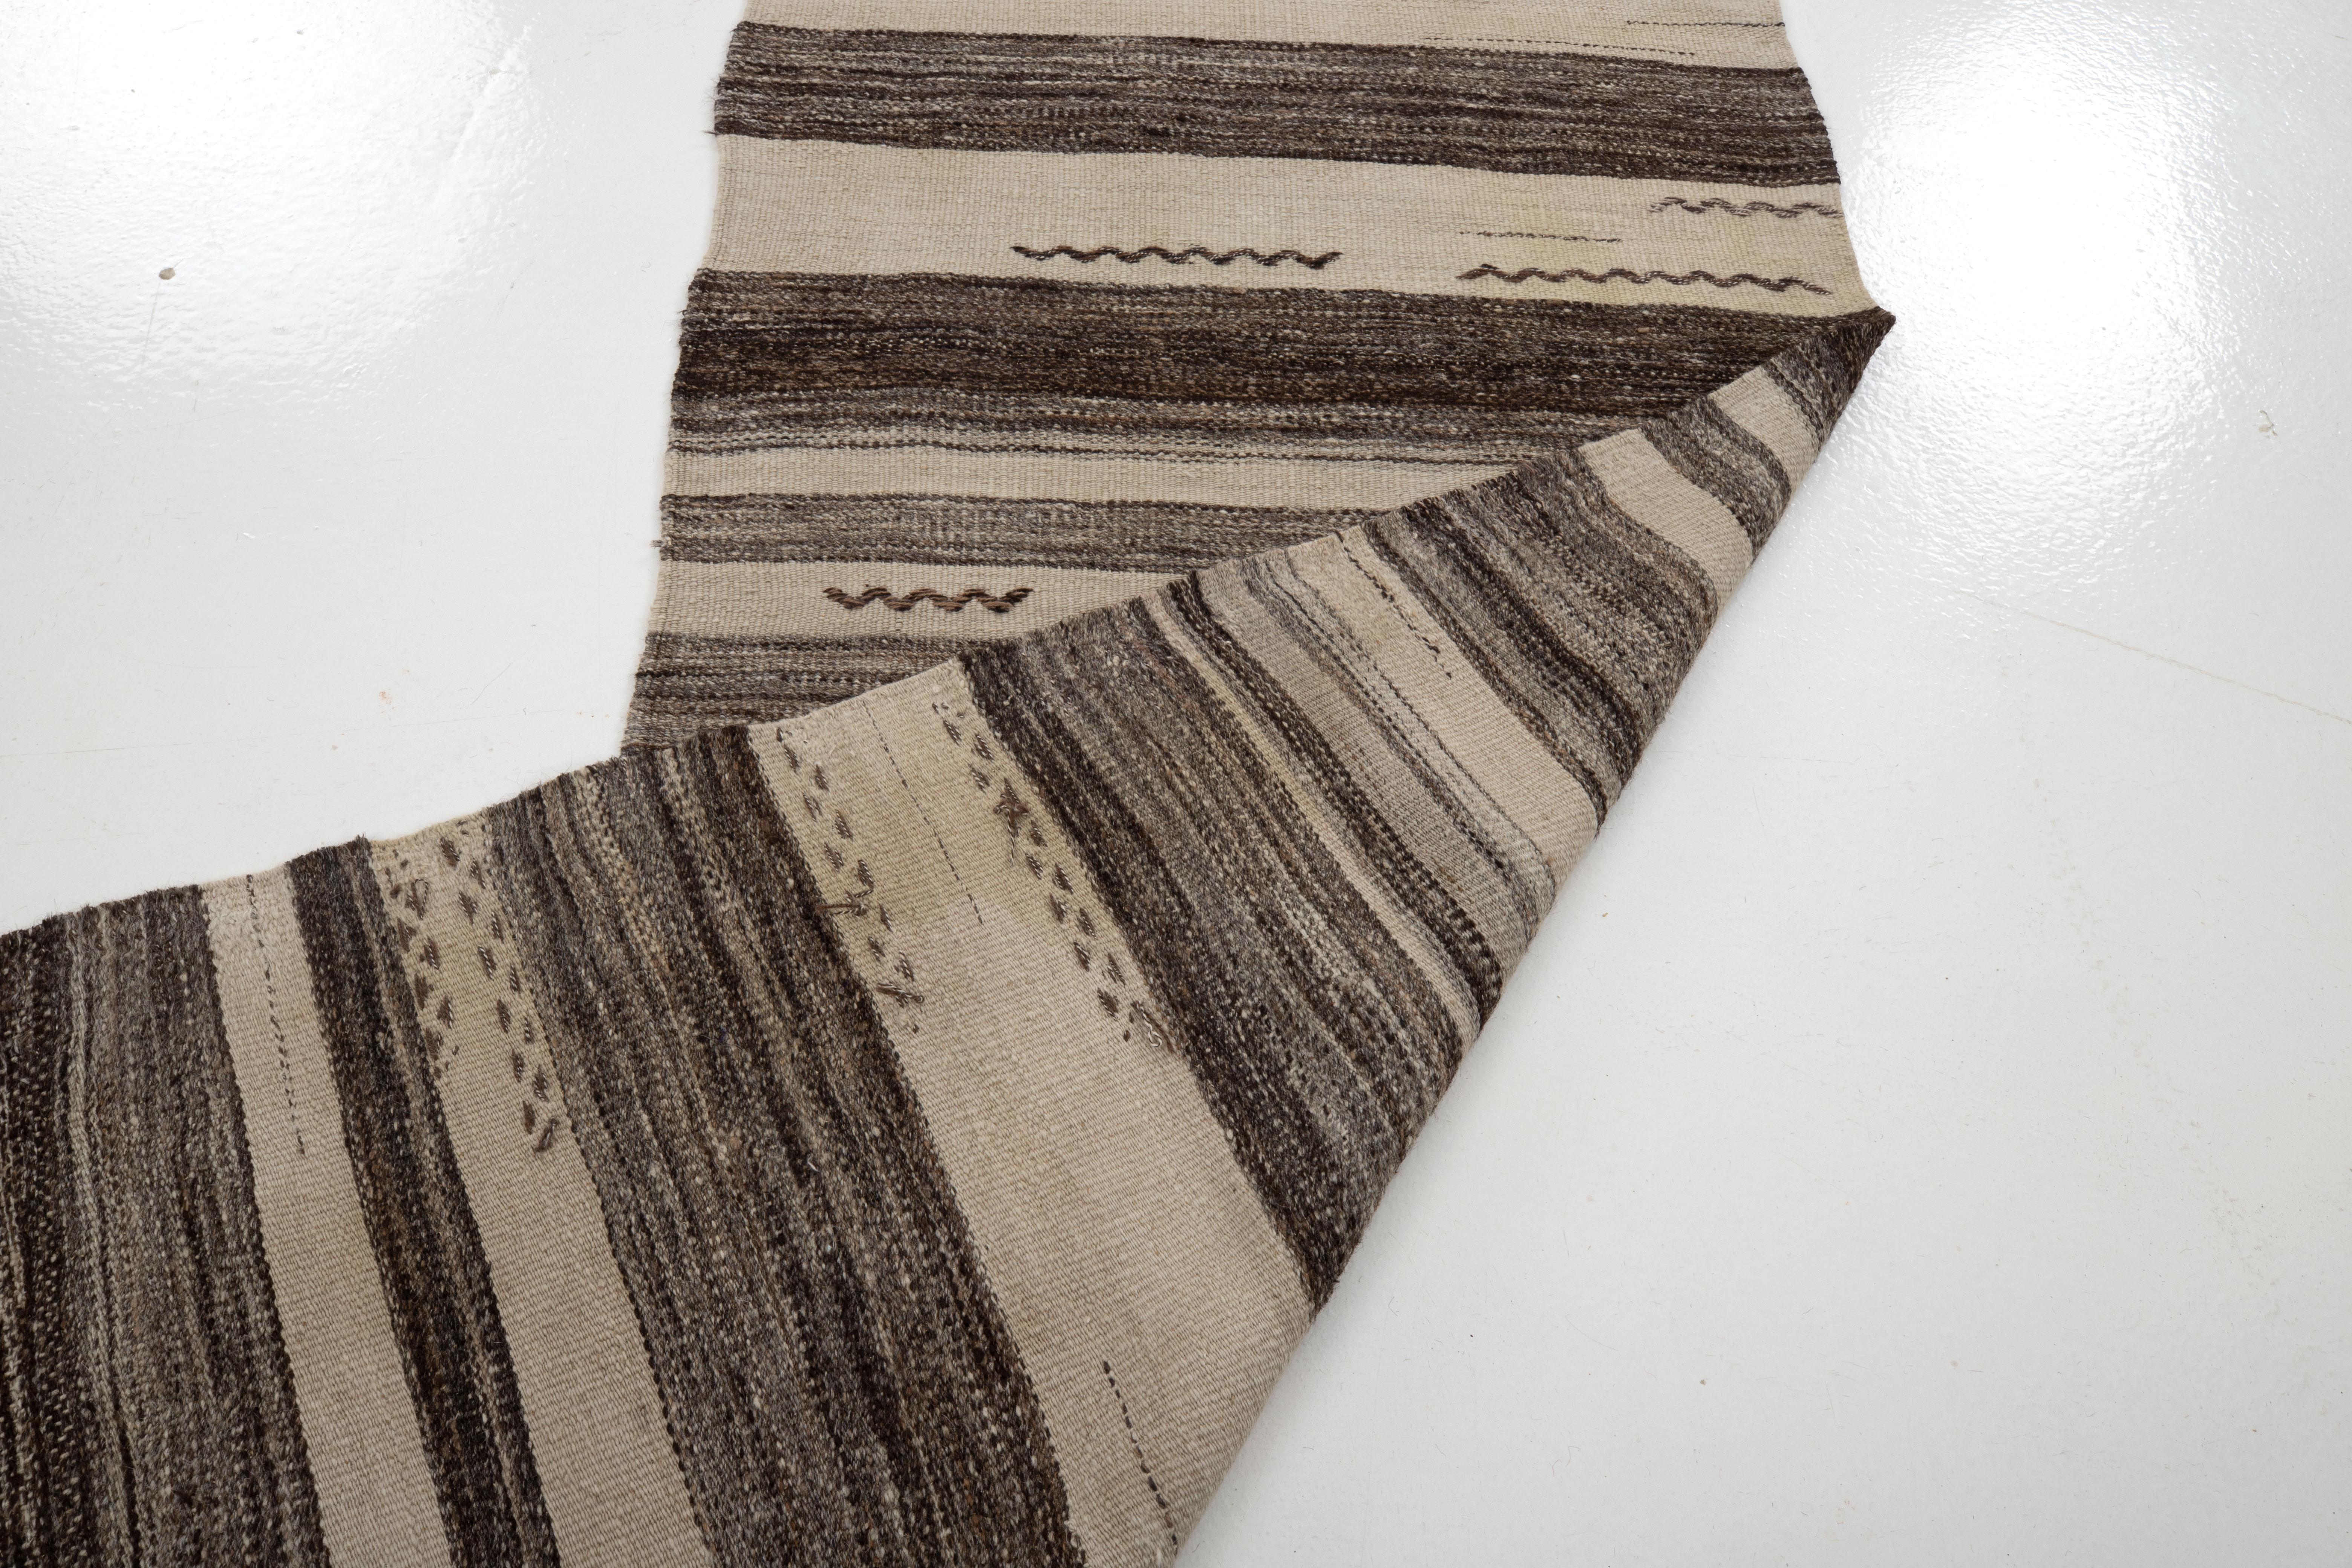 Wide Runner Vintage Anatolian Kilim, Goat Hair and Wool Mix, Mid-20th Century For Sale 2